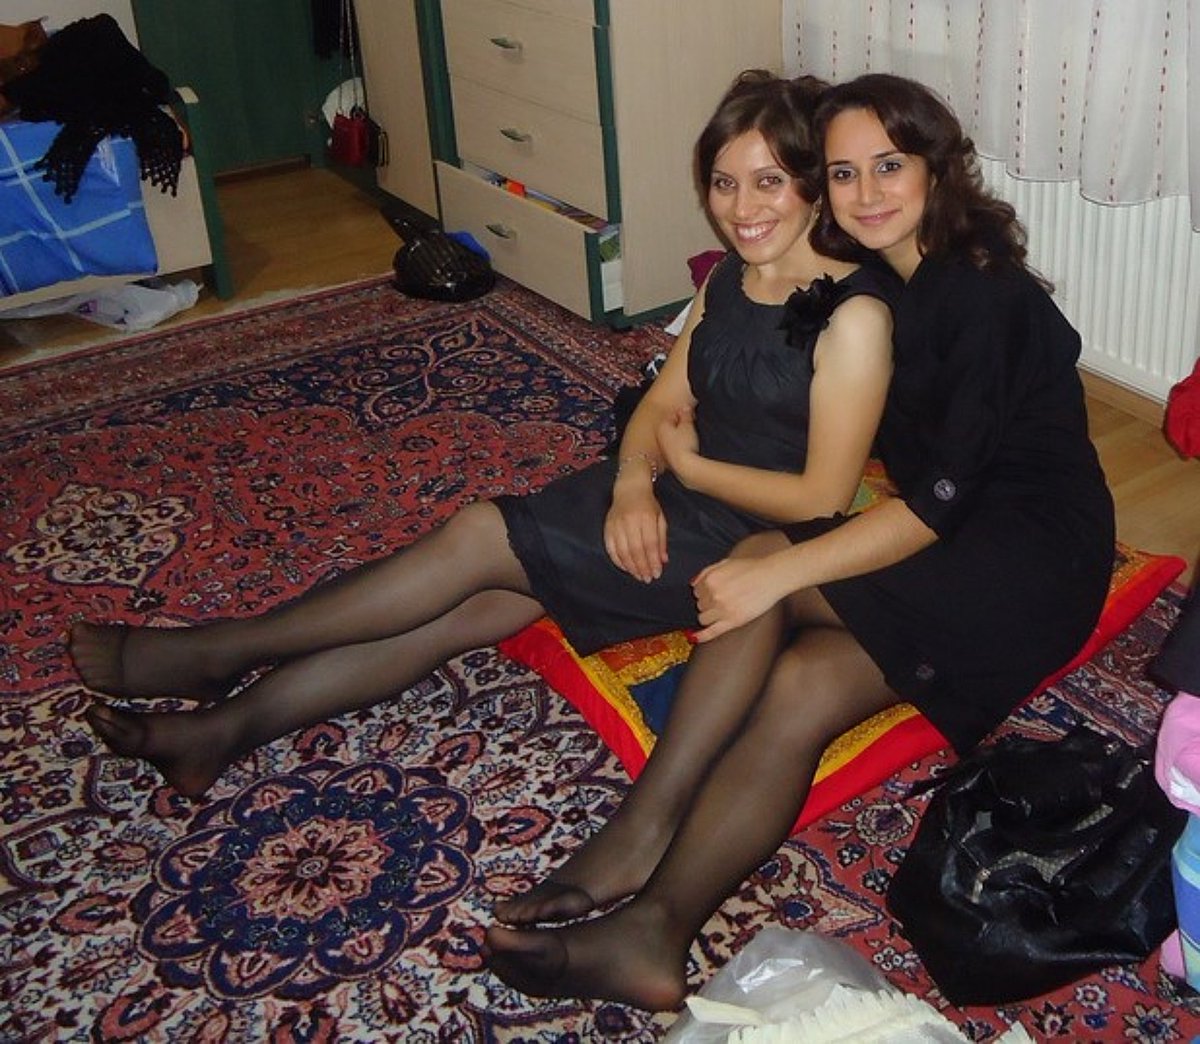 Amateur Pantyhose On Twitter Legs And Feet In Black Pantyhose 